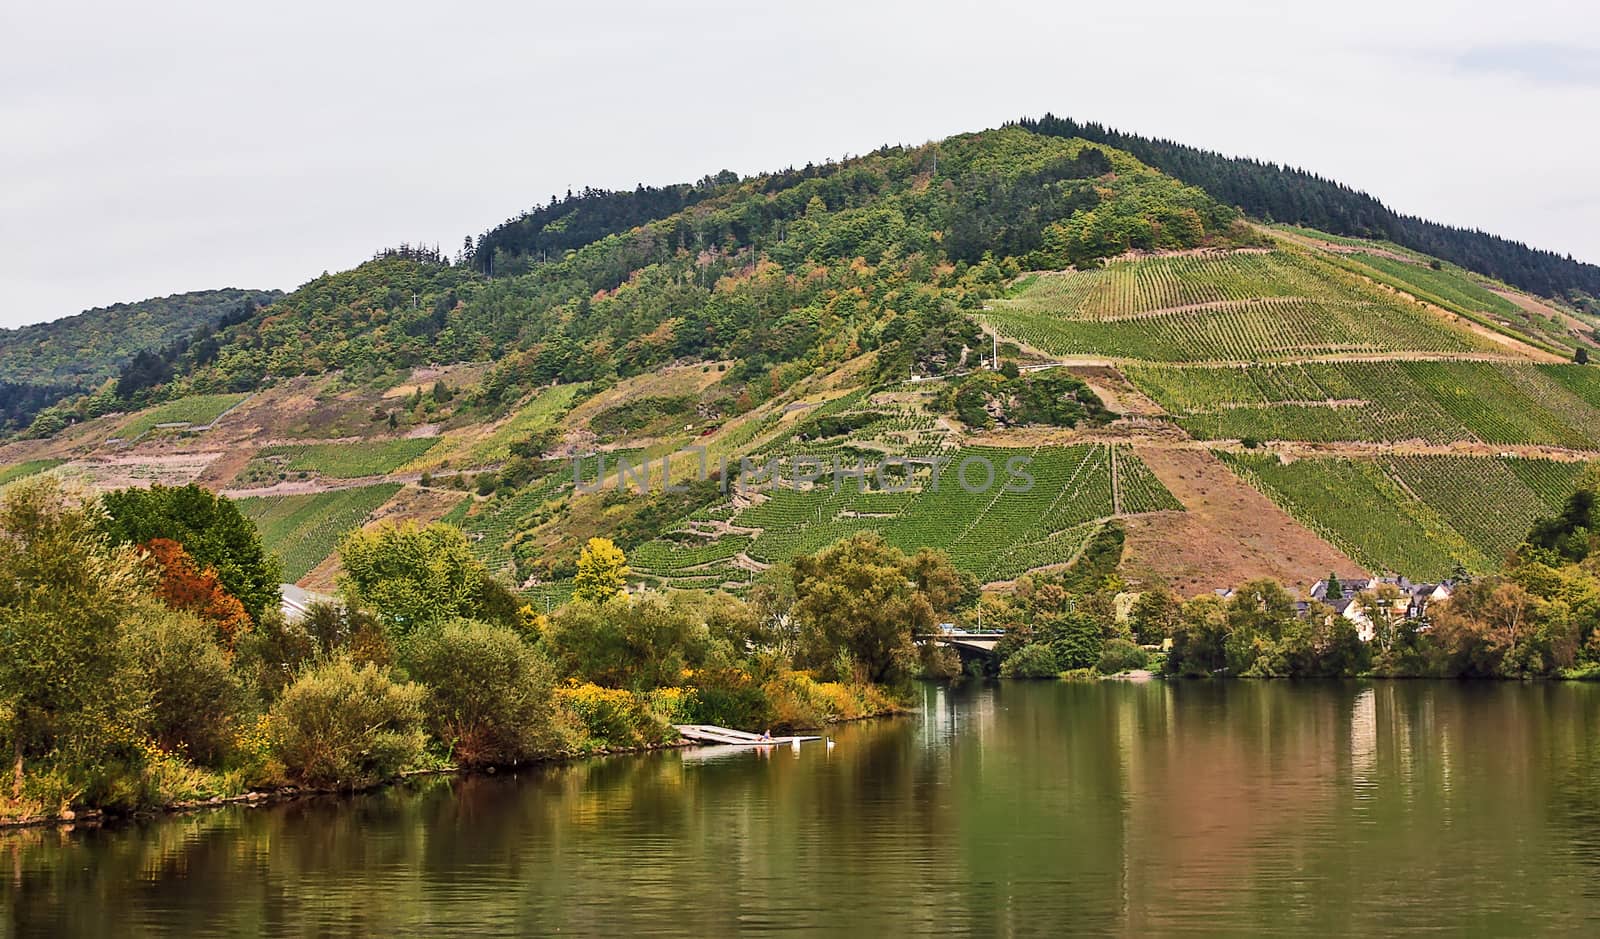 The vineyards along the river Moselle